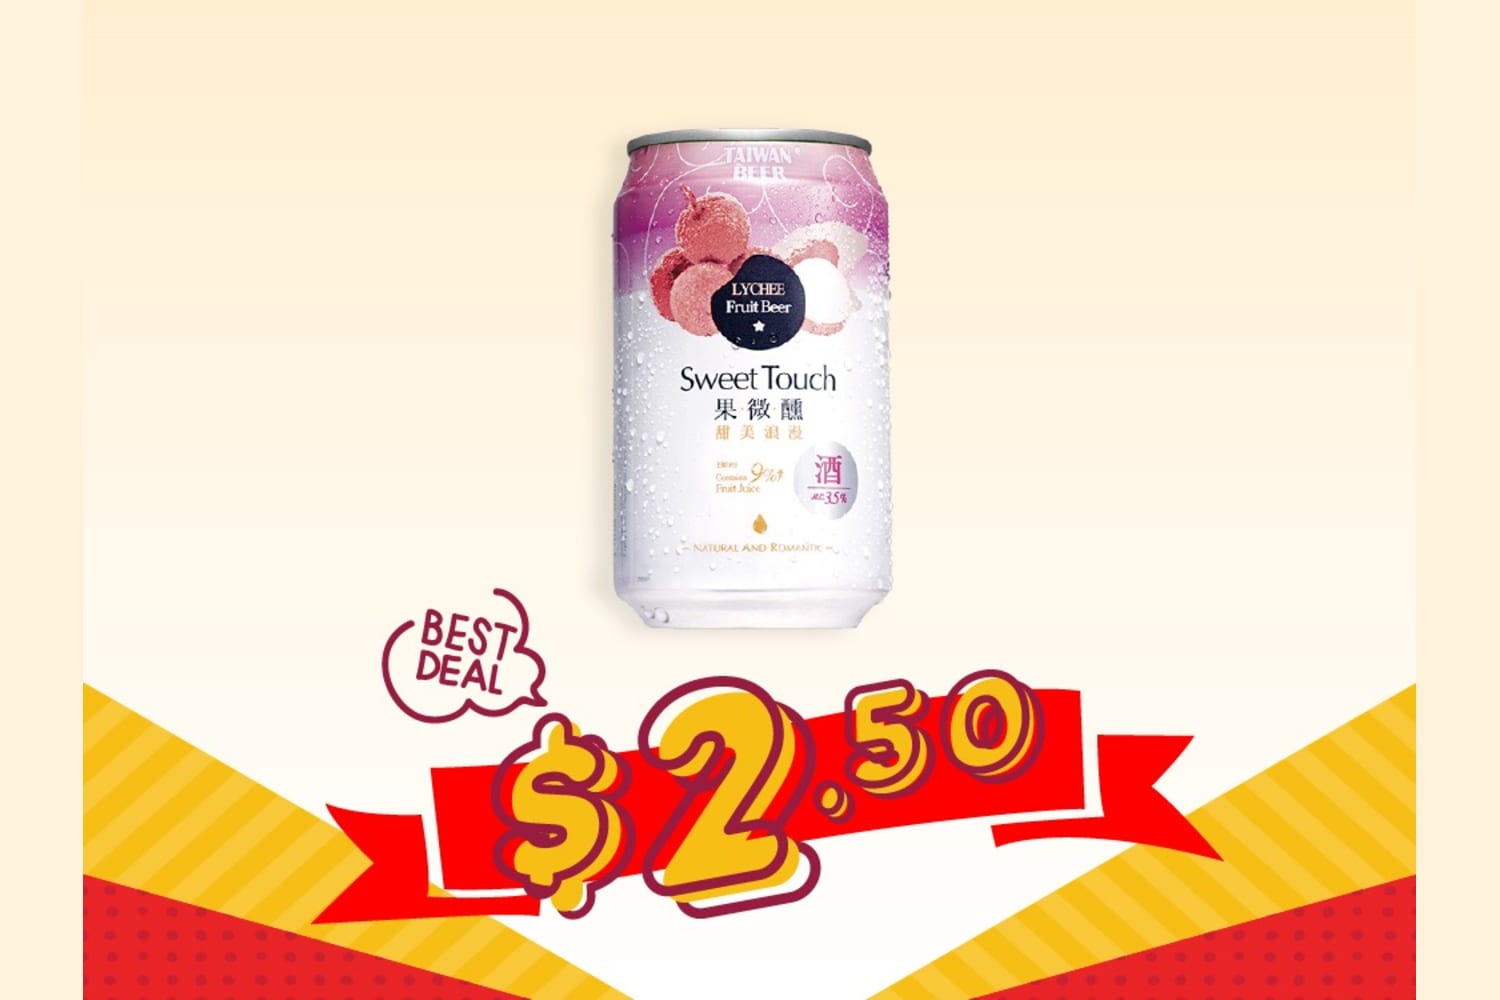 1 x TTL Sweet Touch Lychee Fruit Beer (330 ml)